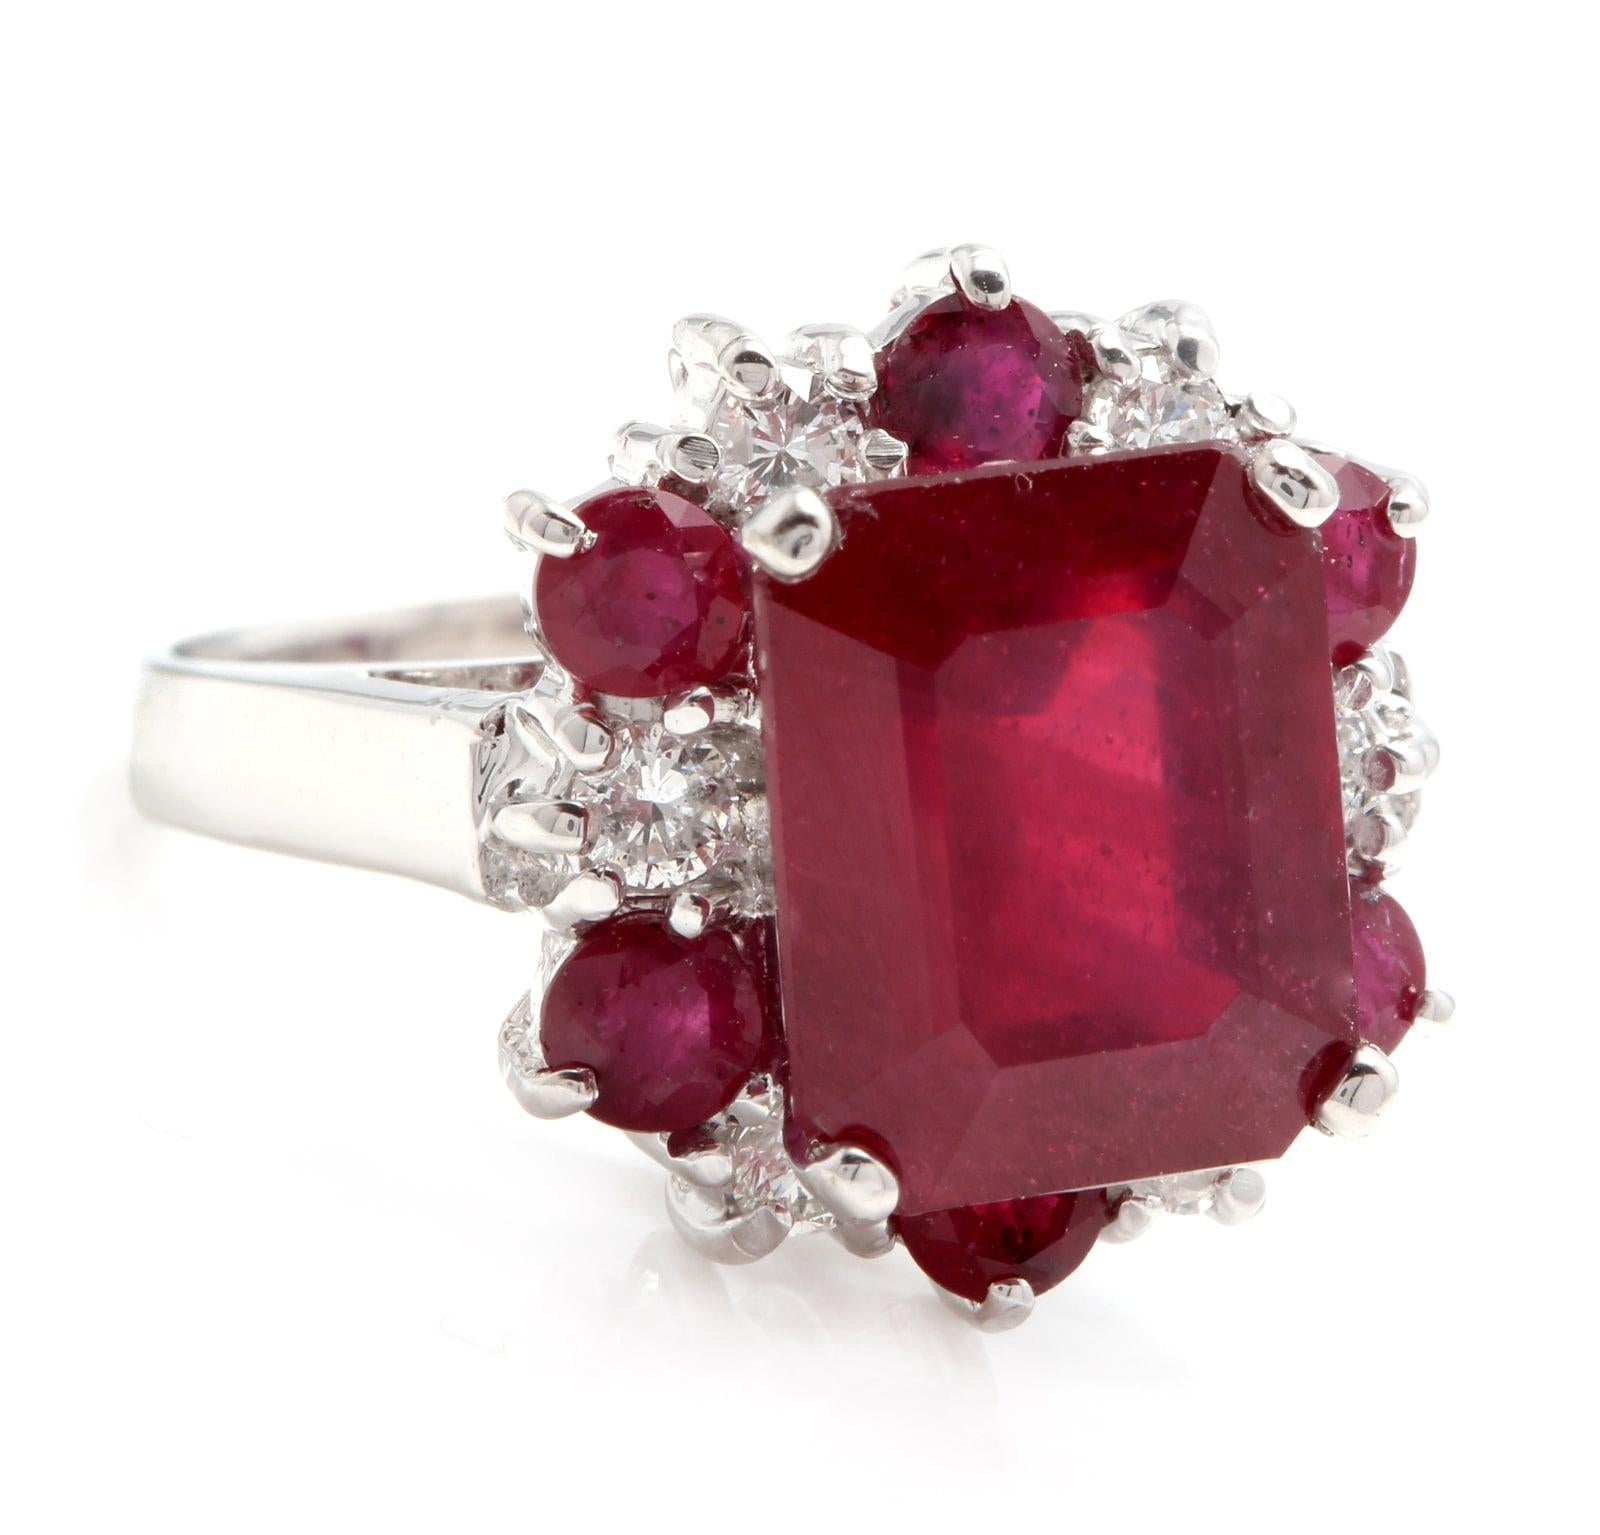 7.45 Carats Impressive Natural Red Ruby and Diamond 14K White Gold Ring

Total Emerald Cut Center Red Ruby Weight is Approx. 6.00 Carats (Lead Glass Filled)

Center Ruby Measures: Approx. 10.00 x 8.00mm

Side Natural Rubies Weight is: Approx. 1.05